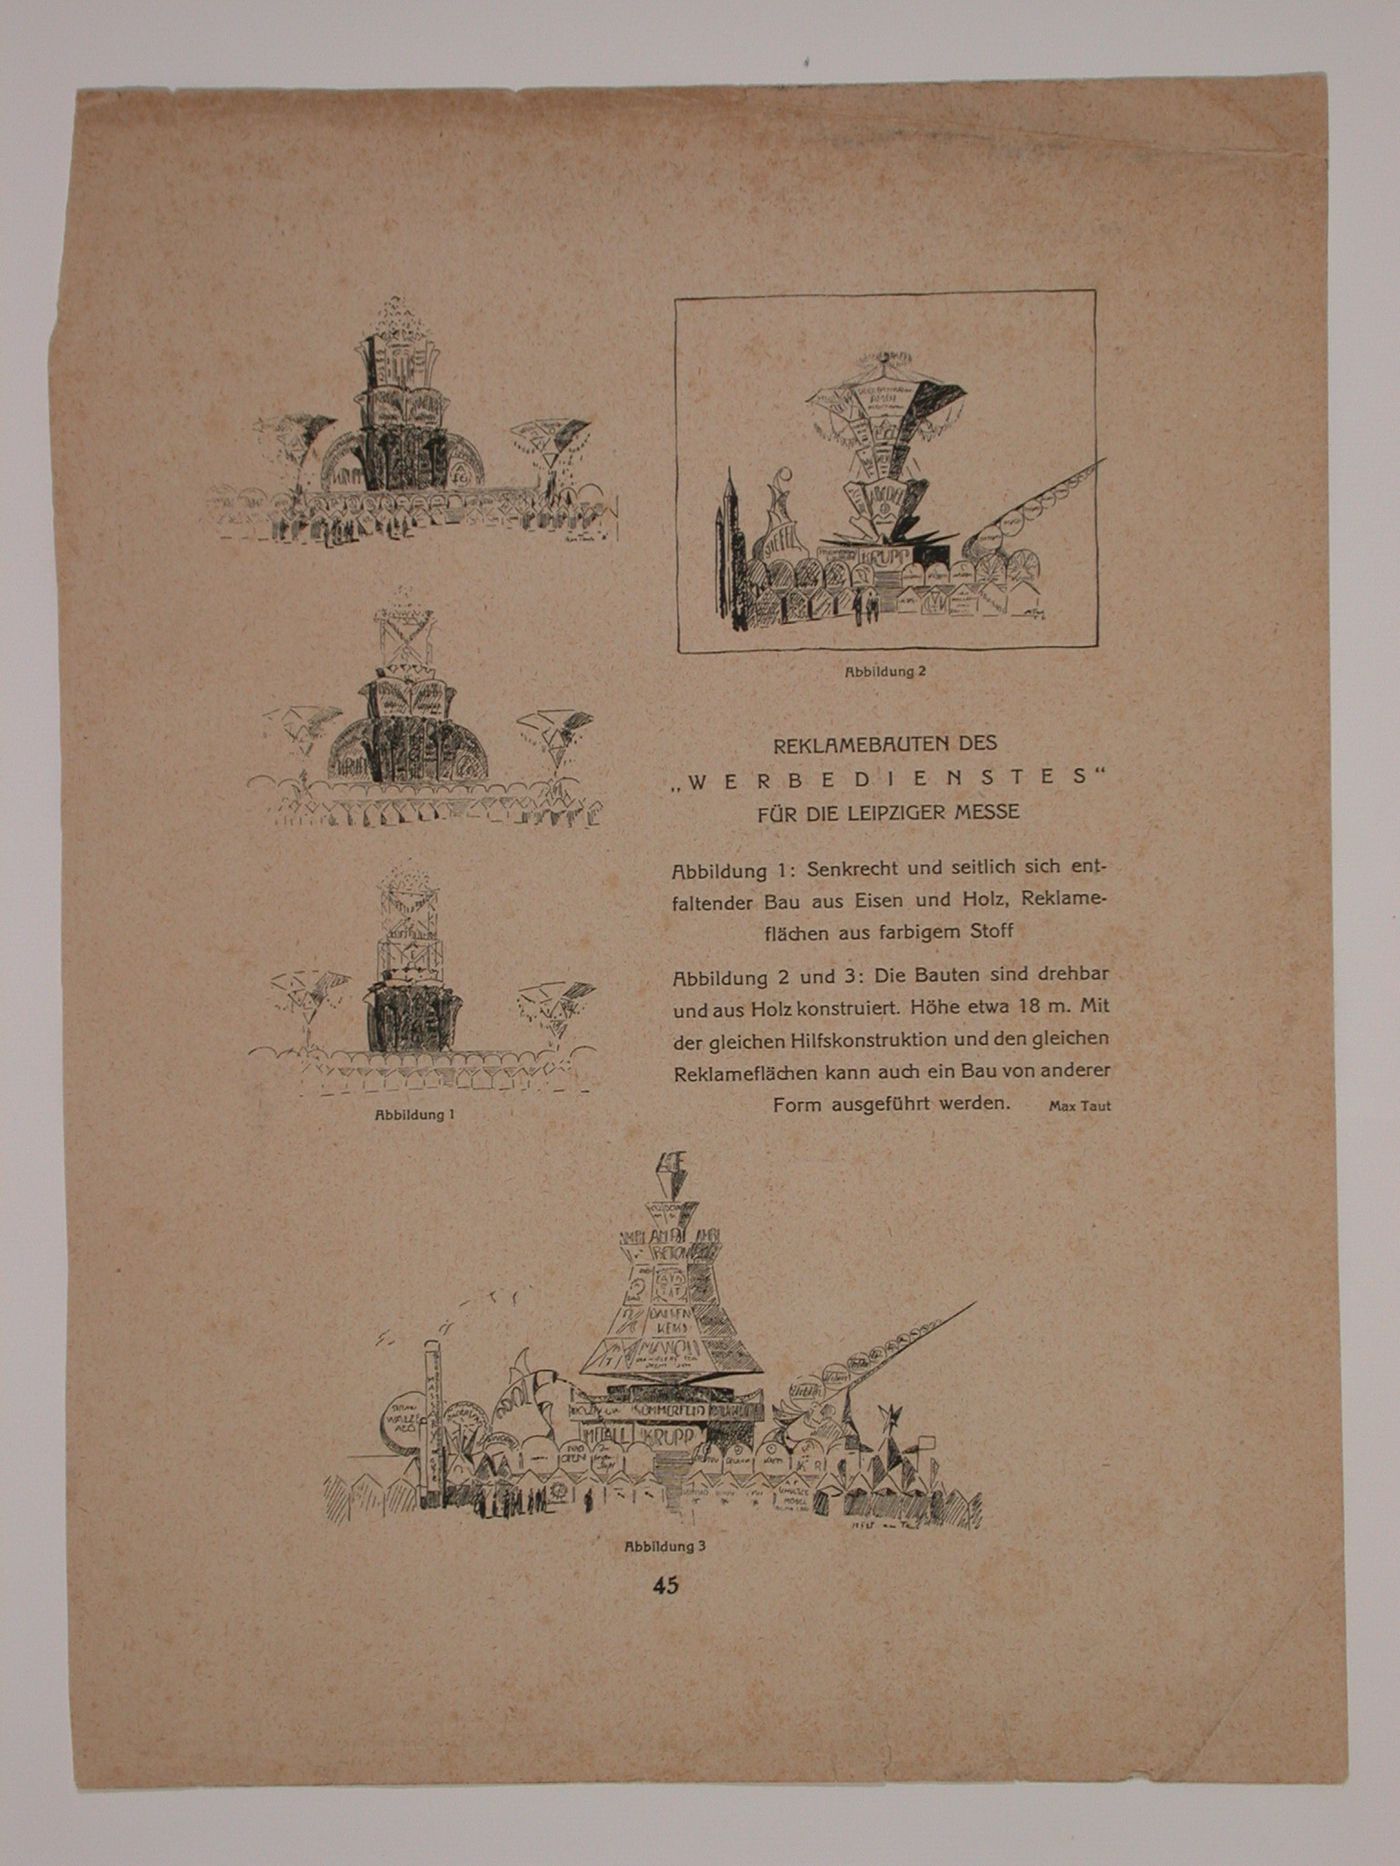 Page from a unidentified publication with text and elevations drawings by Max Taut